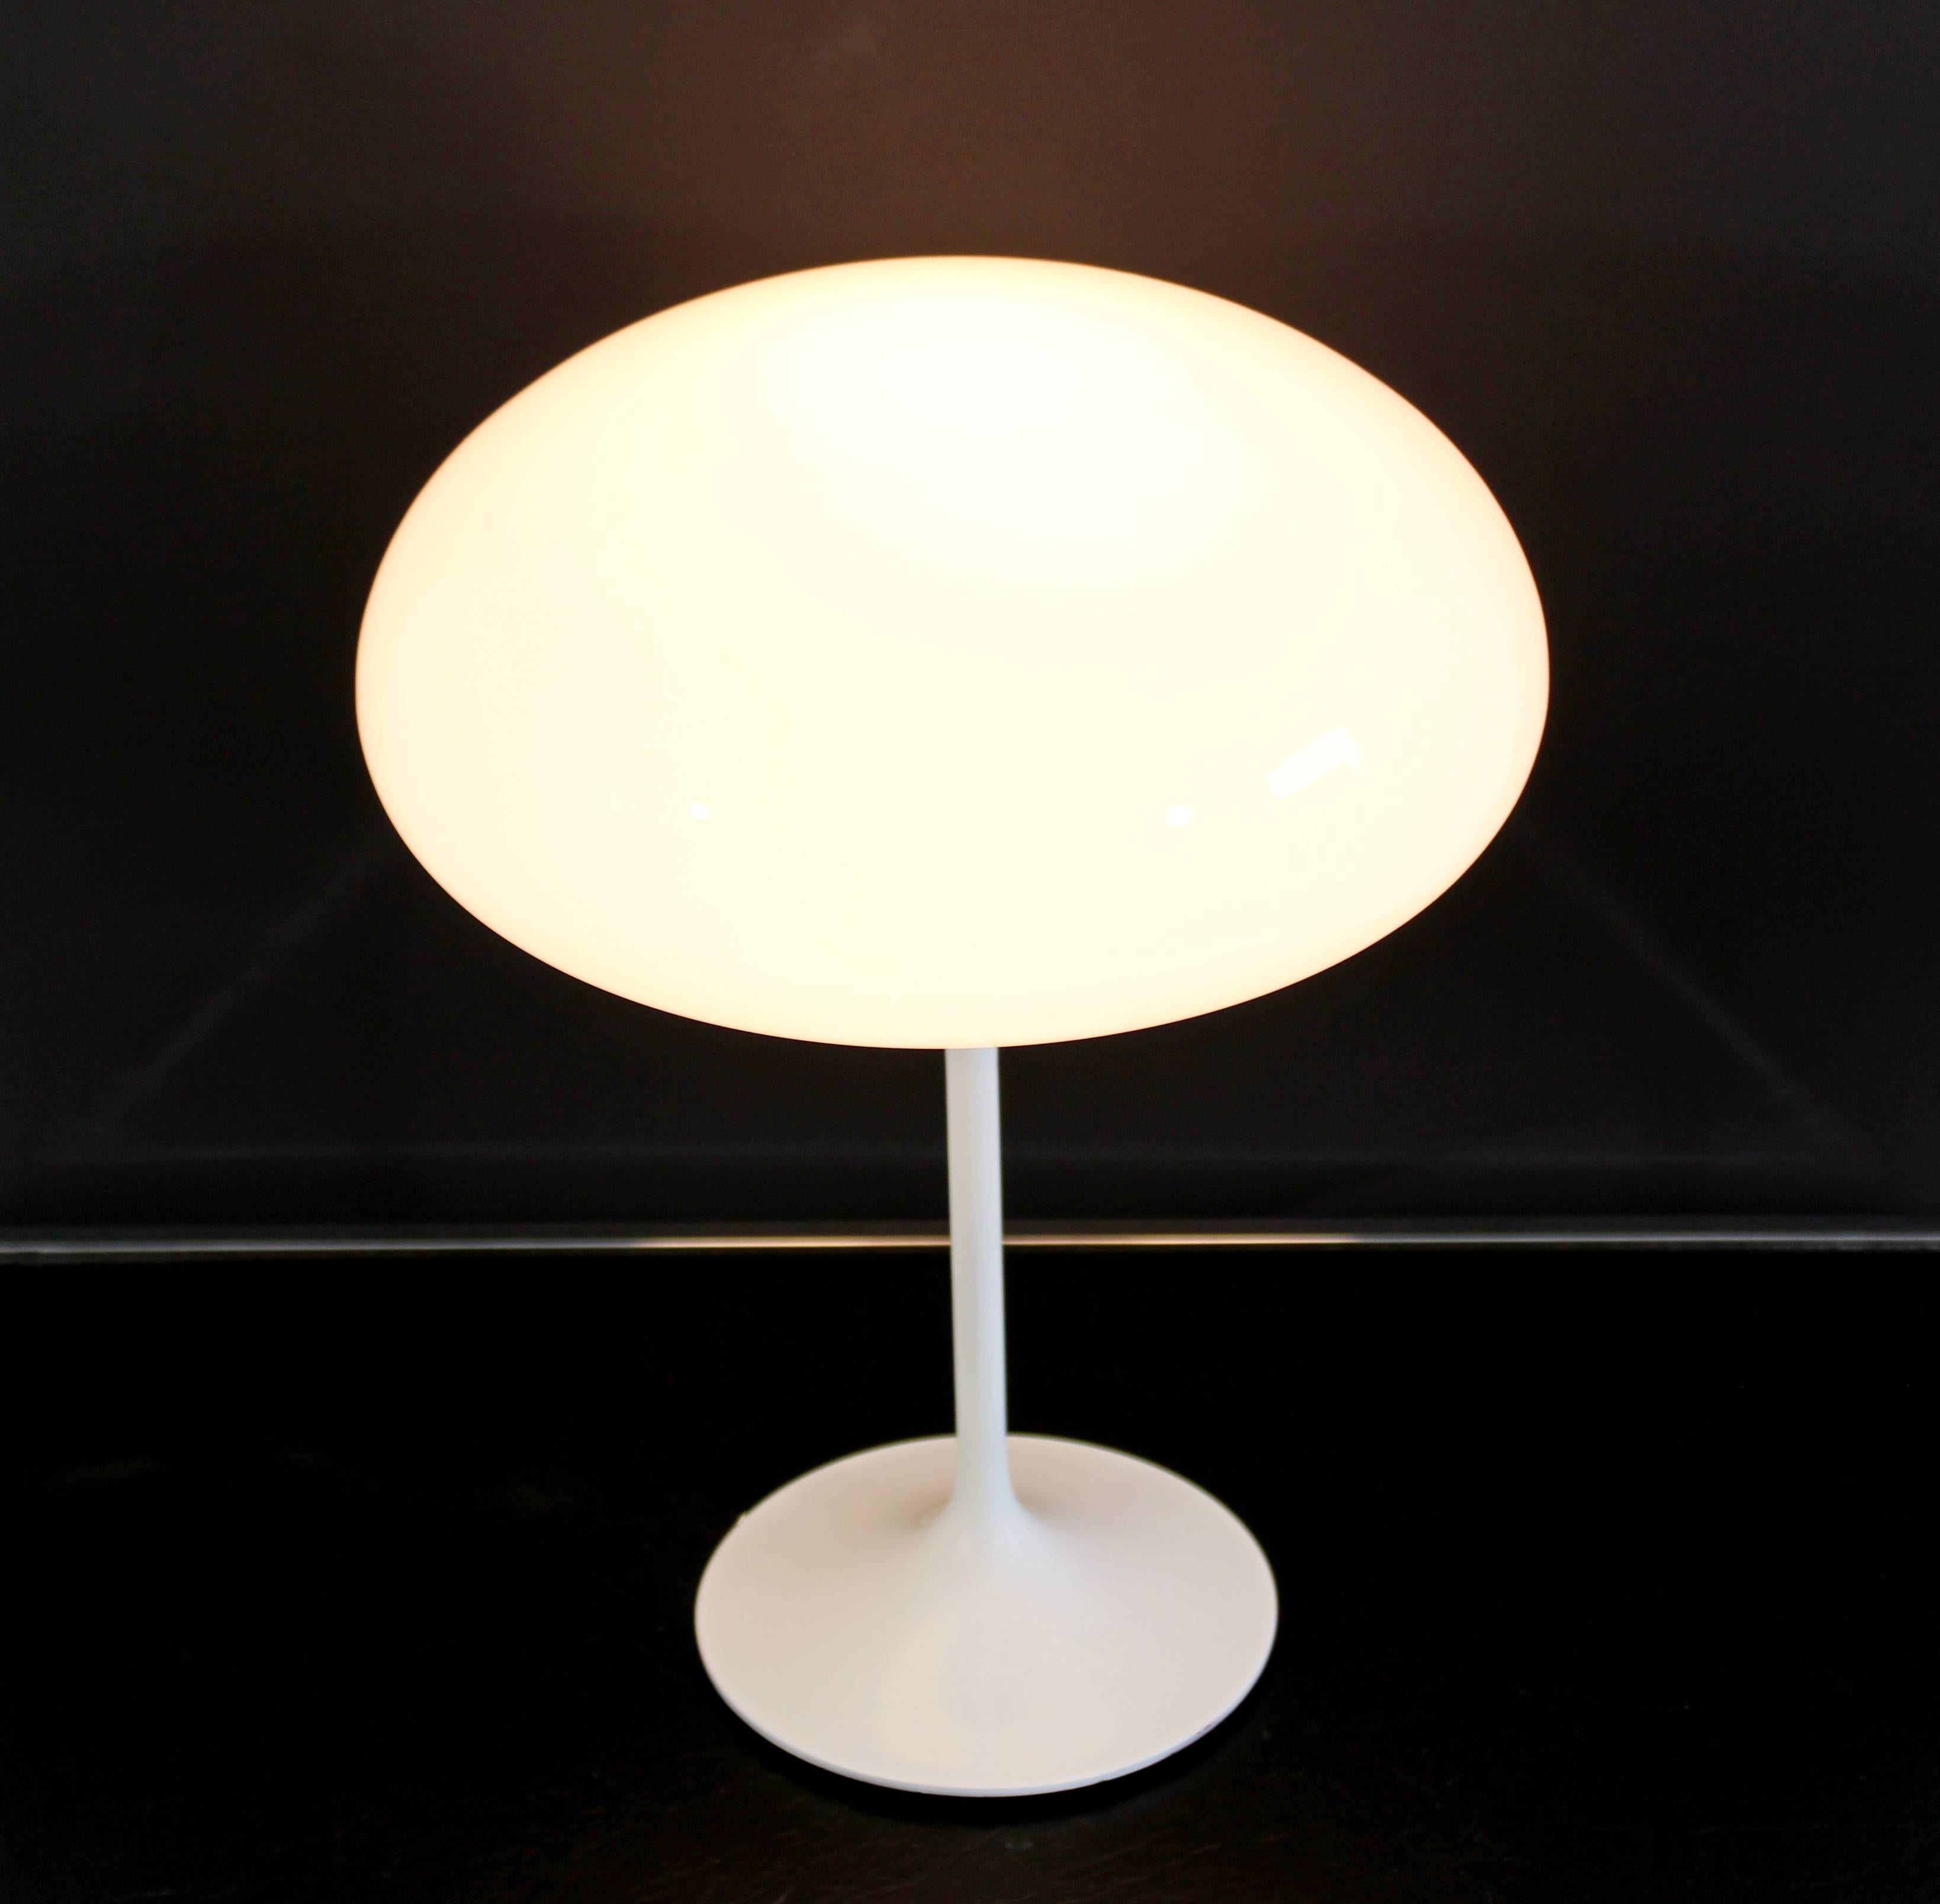 For your consideration is a gorgeous, white glass mushroom table lamp, by Bill Curry for Laurel Lamps, circa the 1970s. In excellent condition. The dimensions are 11